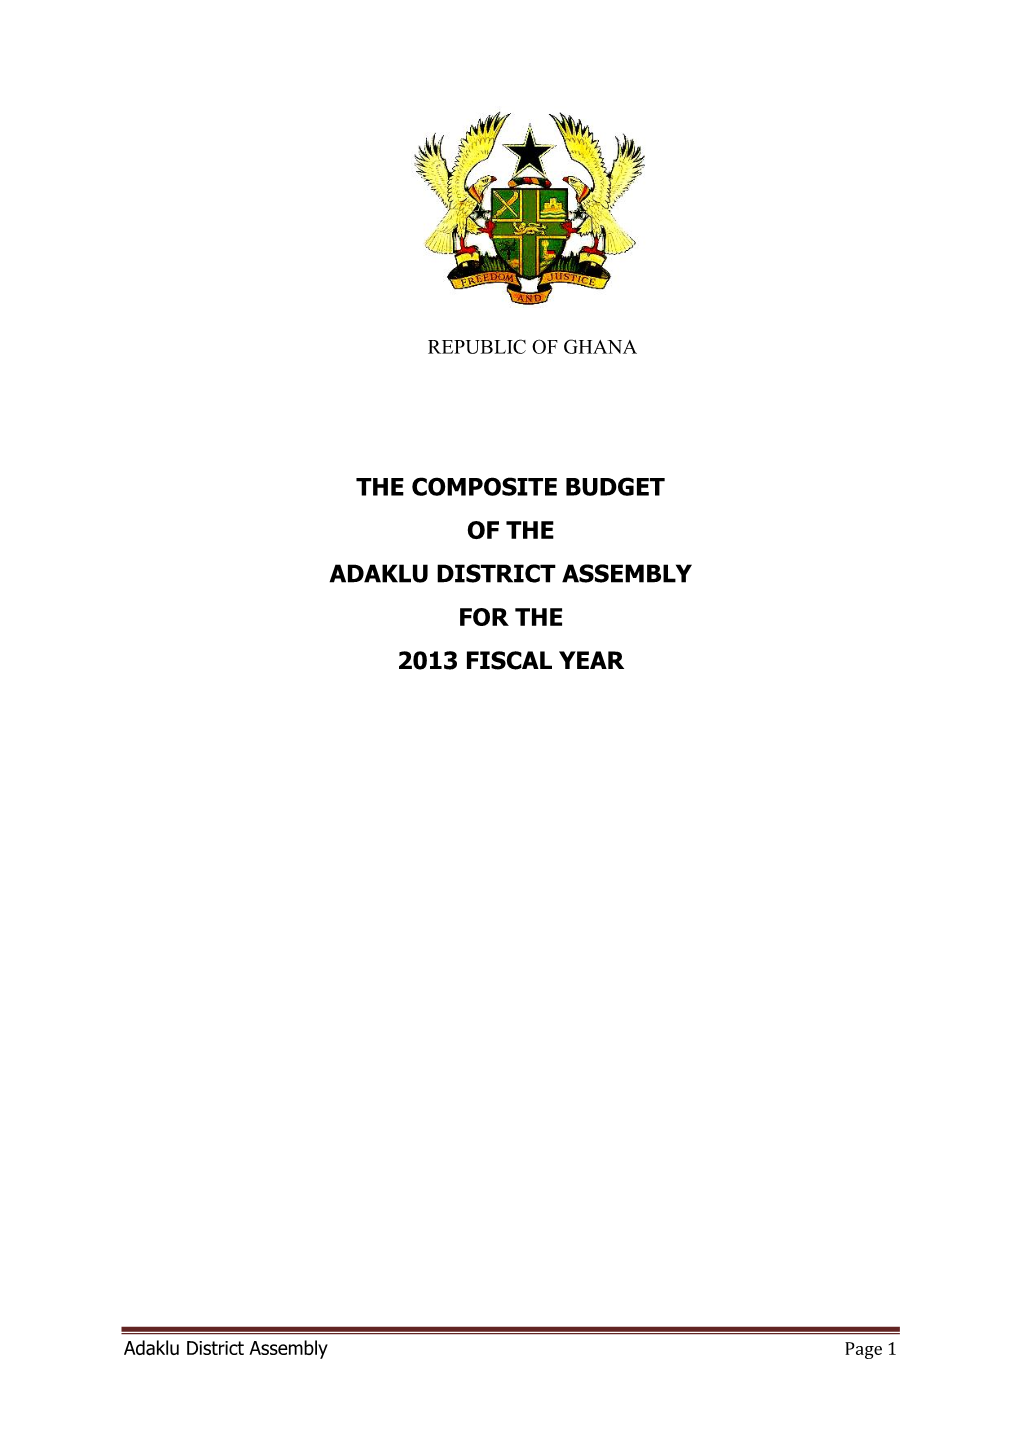 The Composite Budget of the Adaklu District Assembly for the 2013 Fiscal Year